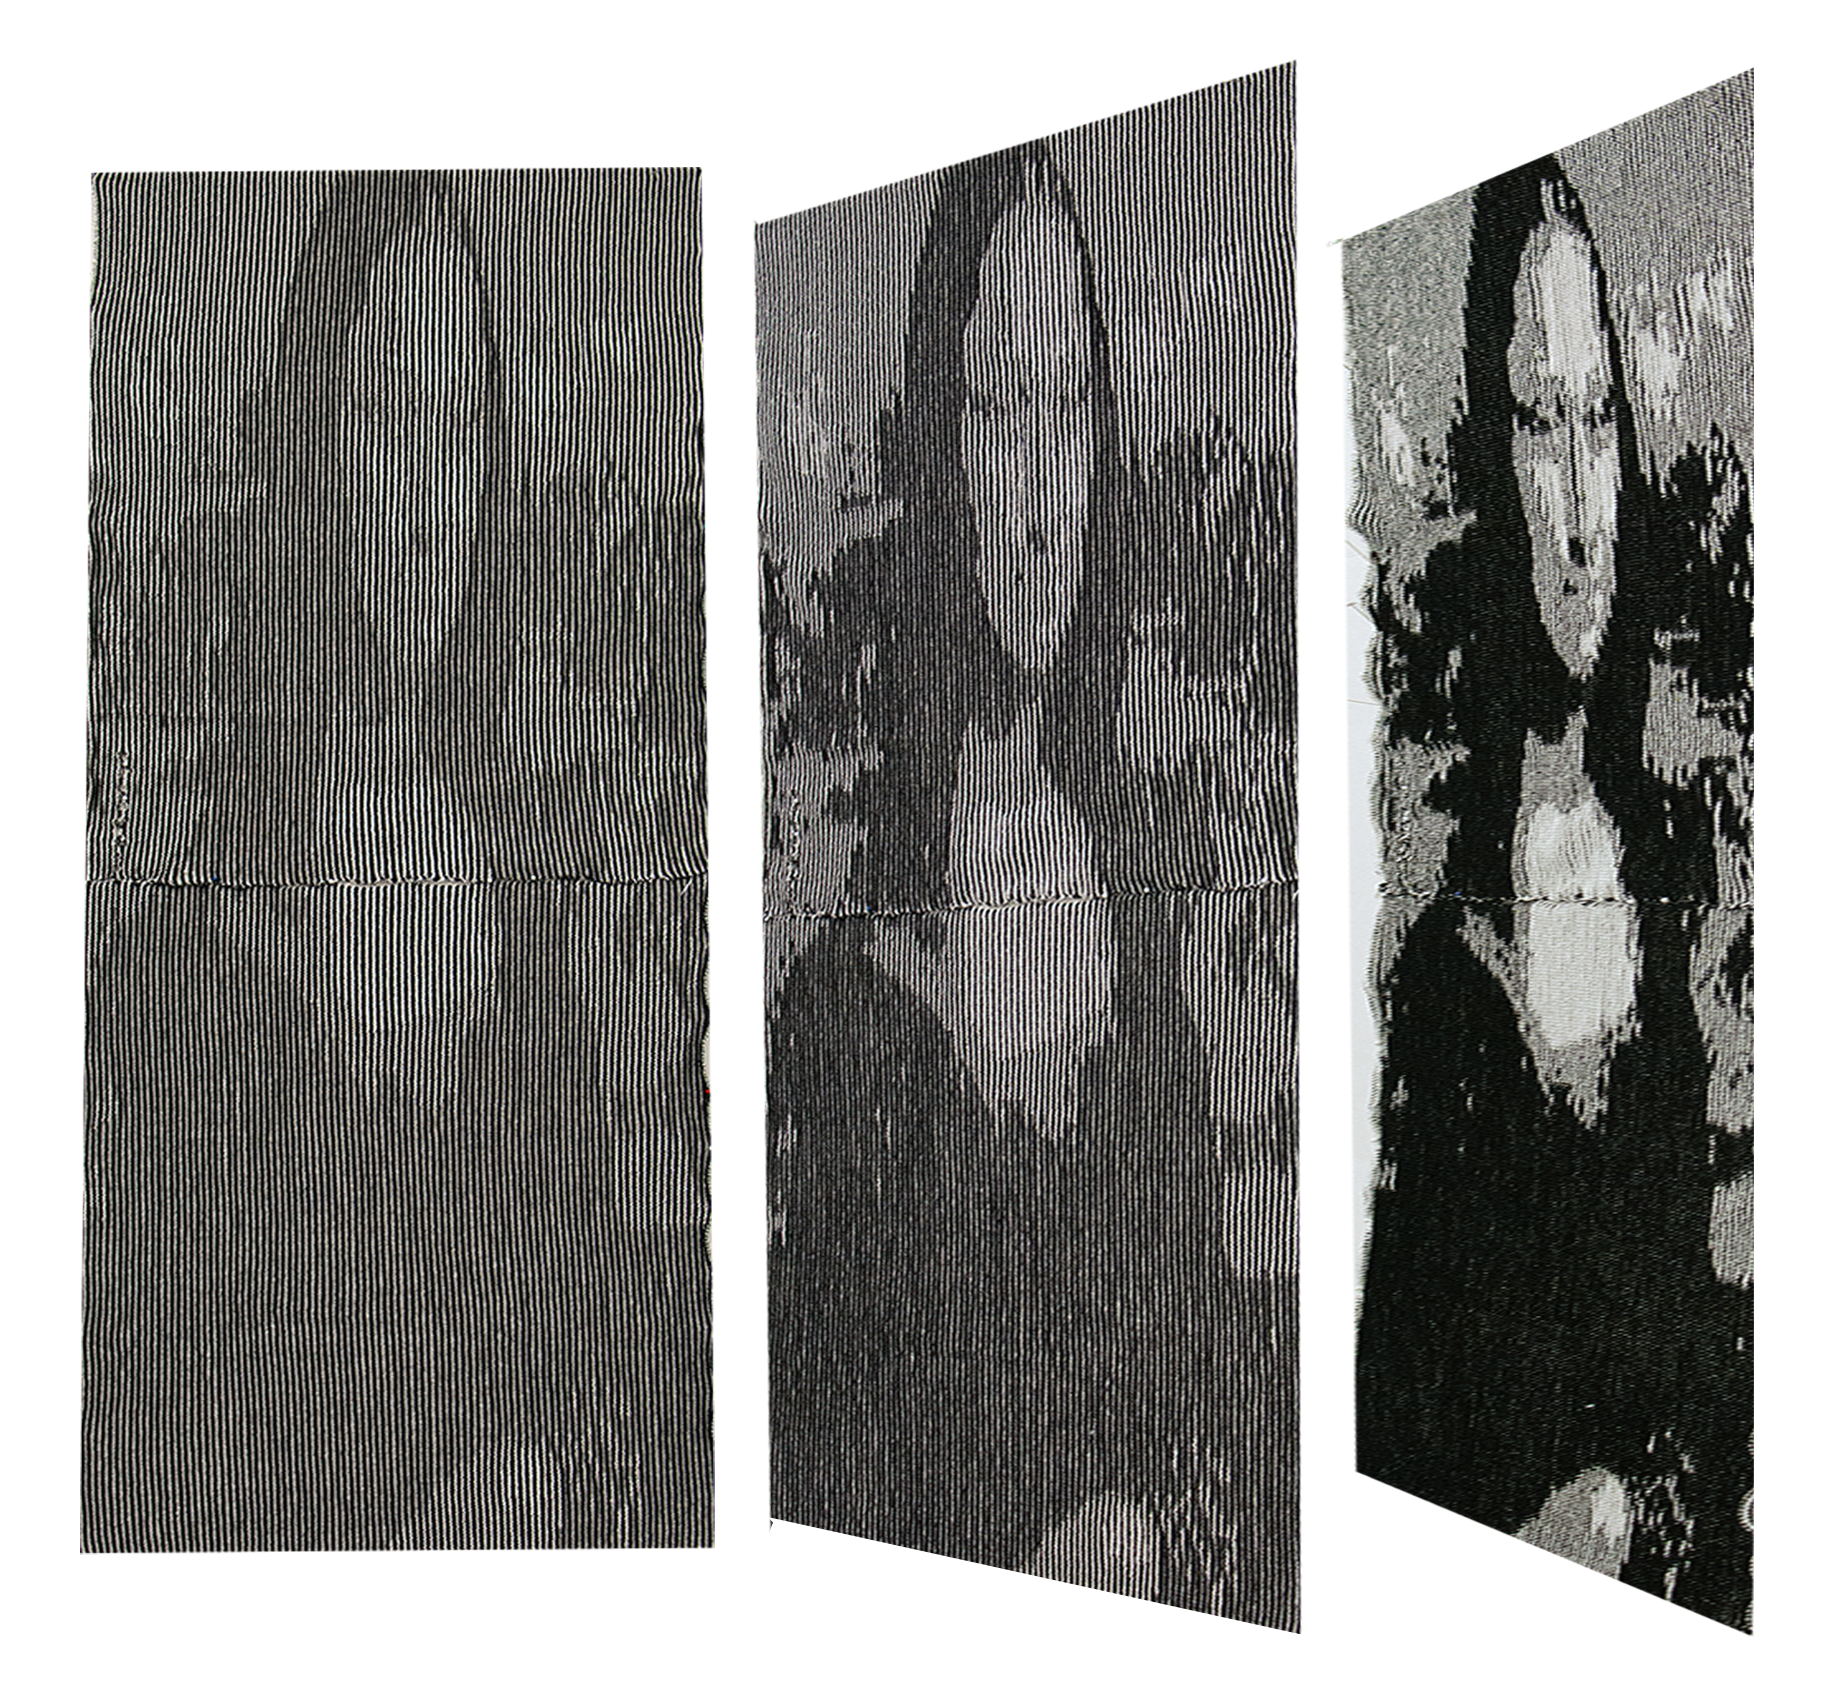 A triptych showing our Mona Lisa illusion from the head on, from a slight angle, and from an extreme angle. The front view obscures the image somewhat and it is not as distinct. The slight angle view has more contrast. The extreme angle view has more distinct areas, sharper white areas and darker black areas for even more contrast.